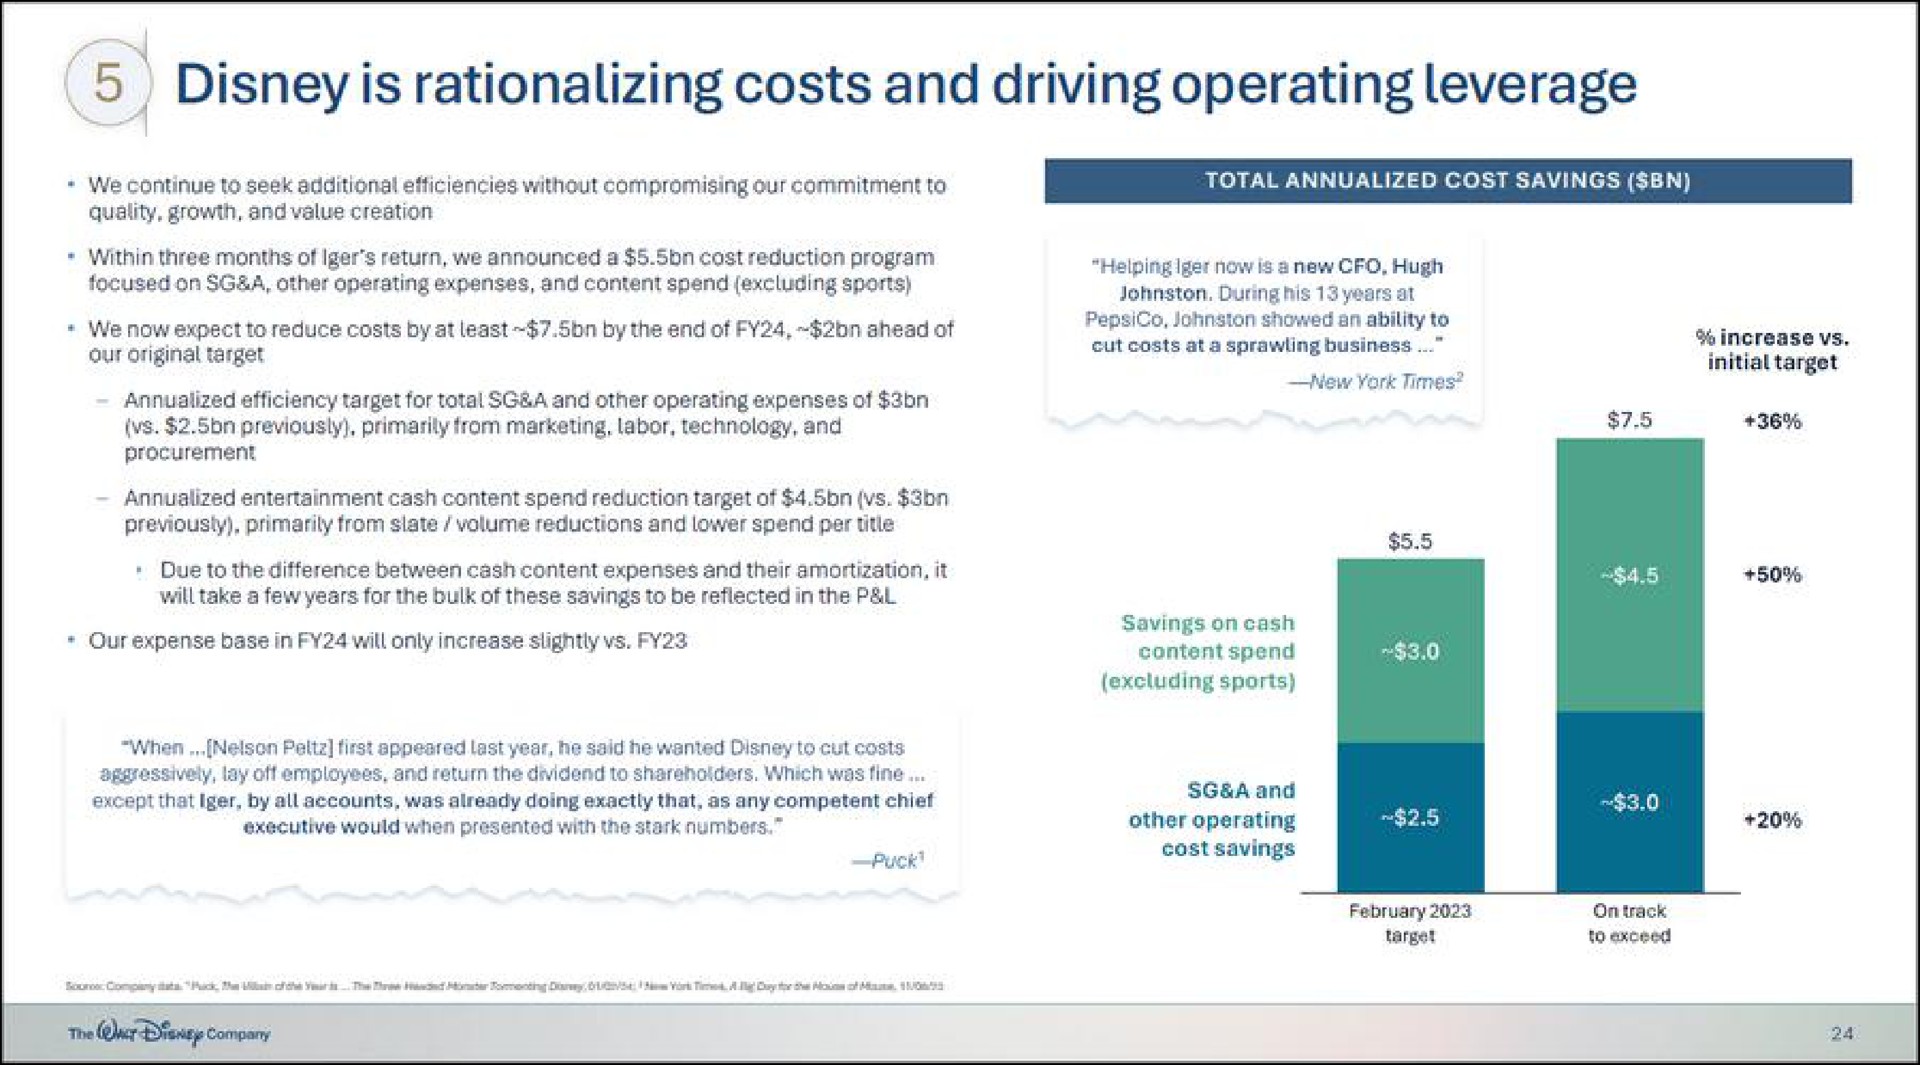 is rationalizing costs and driving operating leverage | Disney